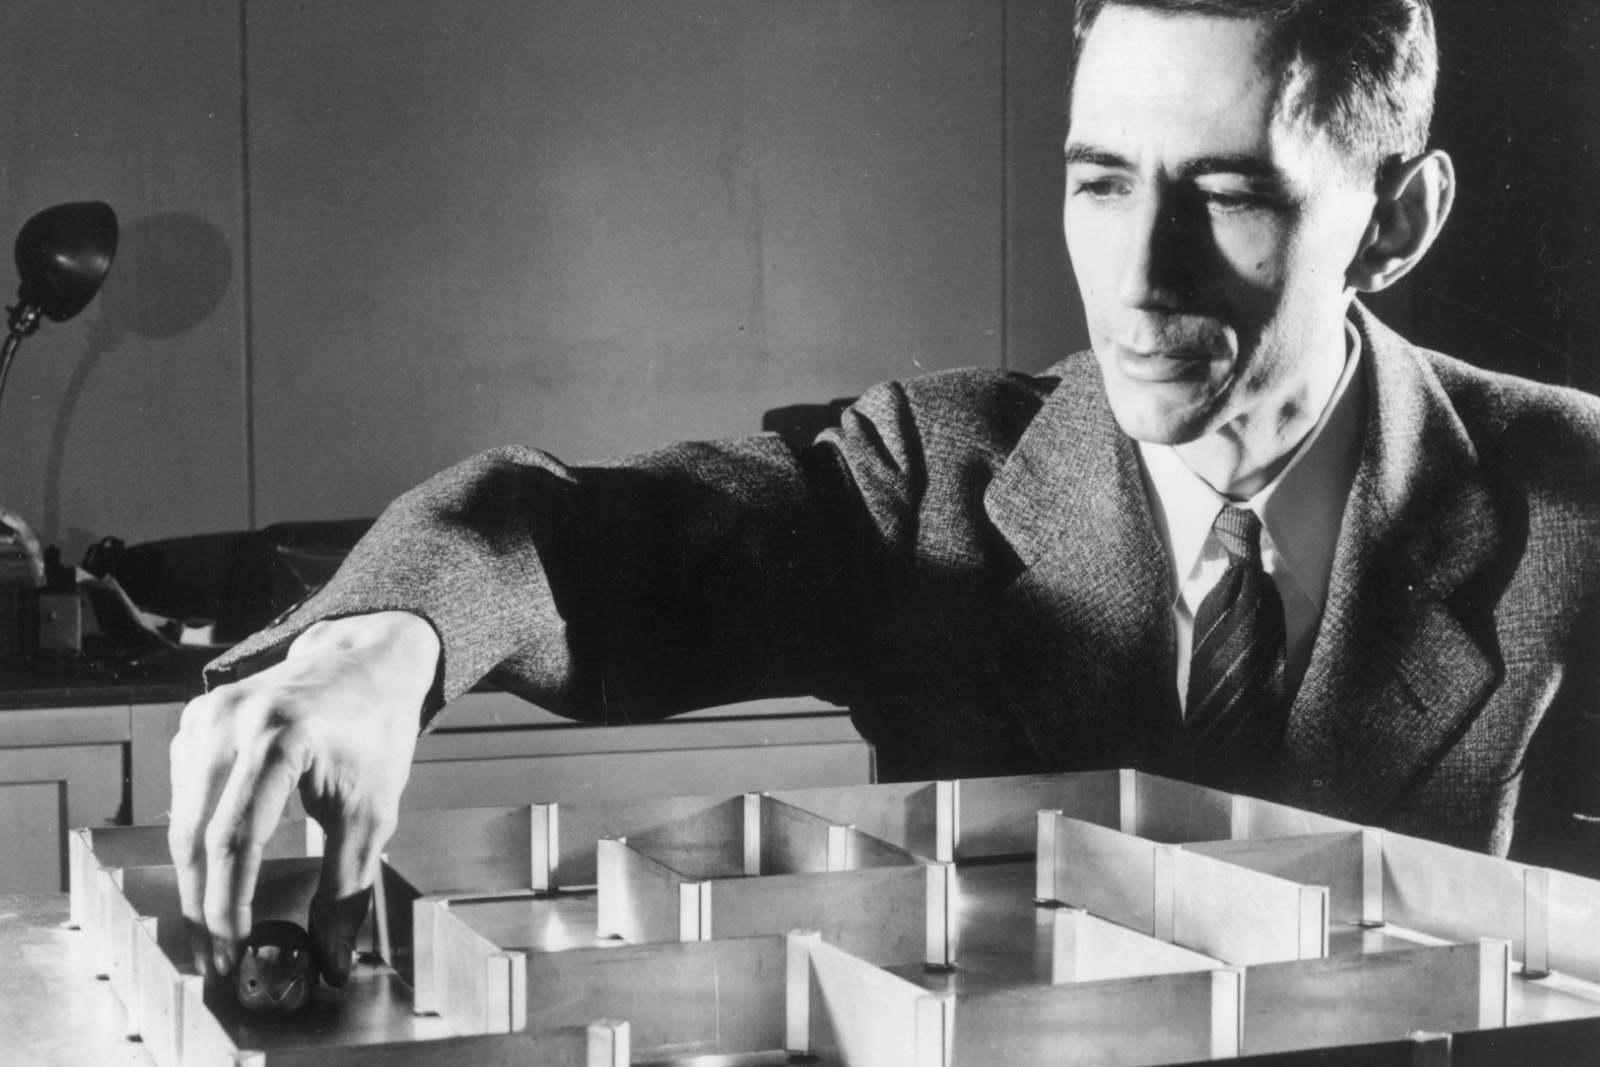 A photograph of mathematician Claude Shannon guiding his labyrinth-traversing mouse Theseus, invented in nineteen fifty, through a tabletop maze.